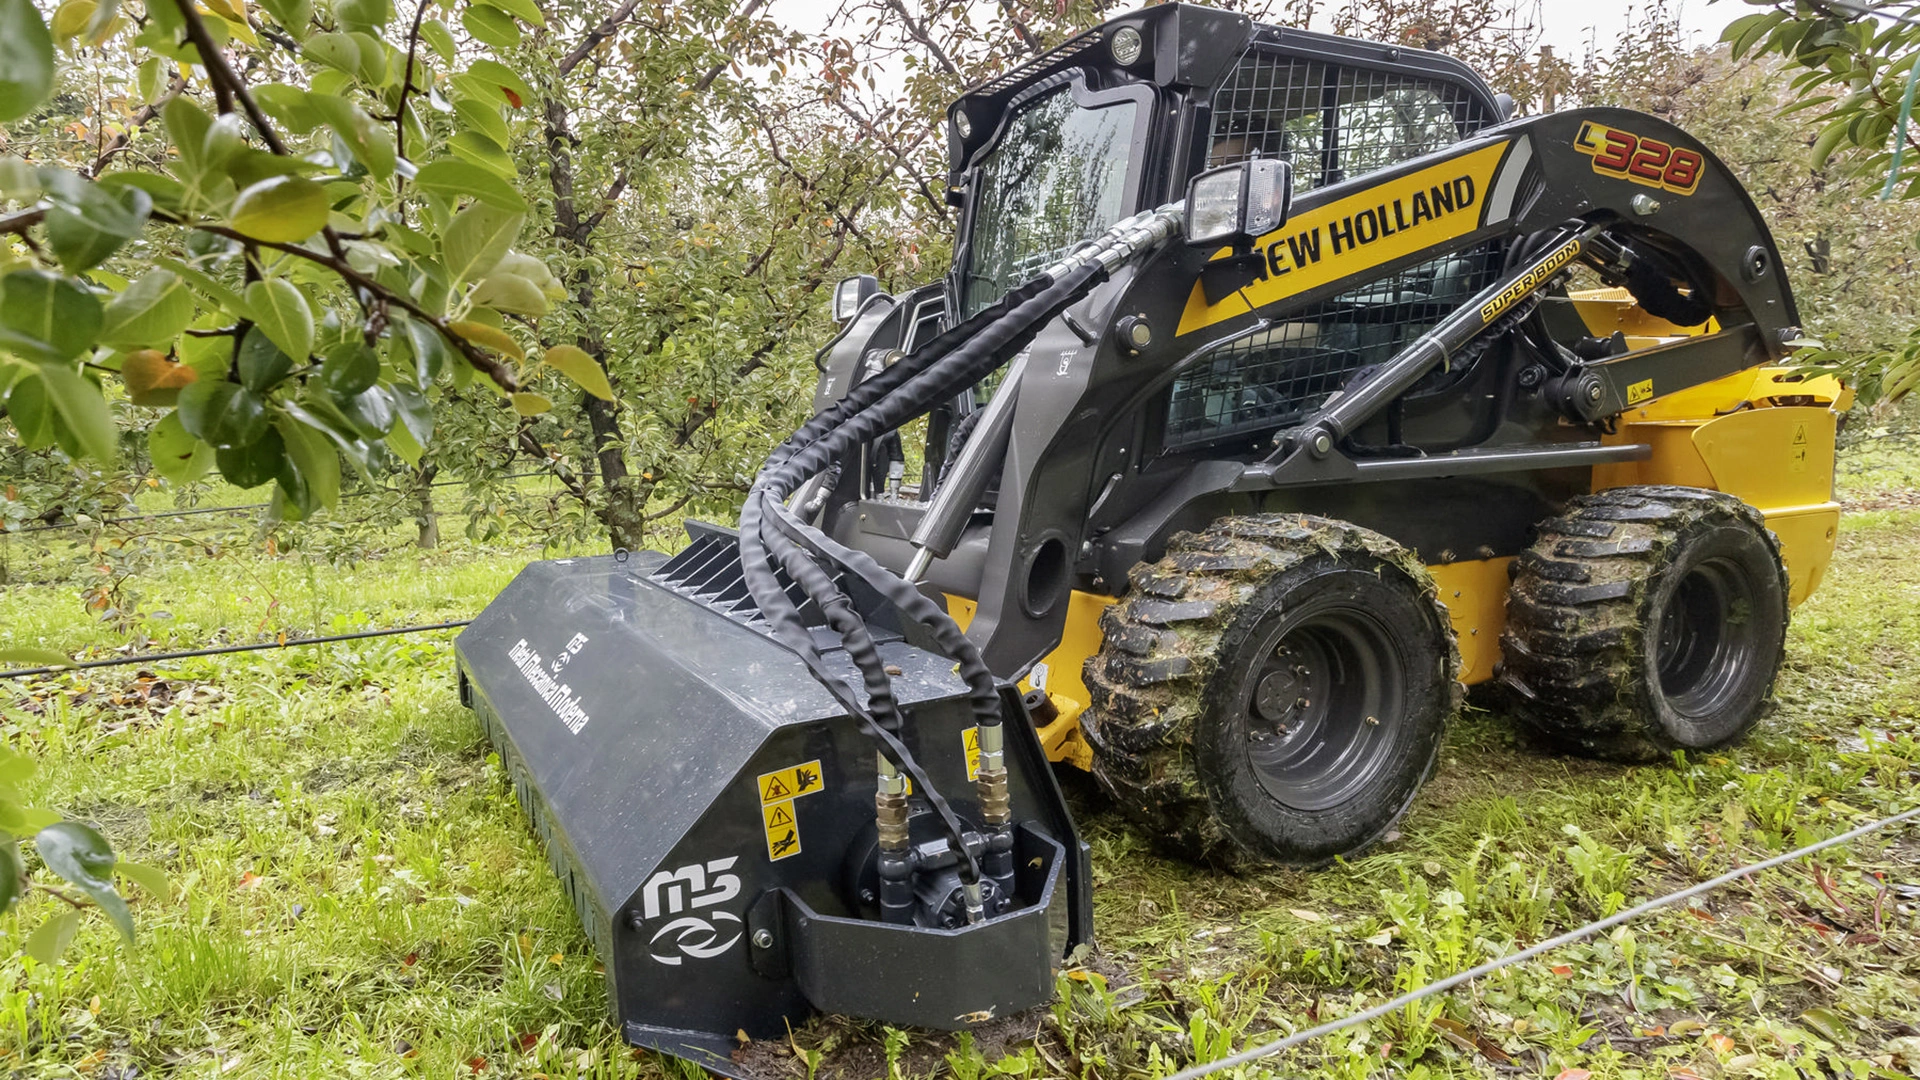 New Holland skid steer loader working in an orchard, muddy tires, amidst apple trees and green grass.